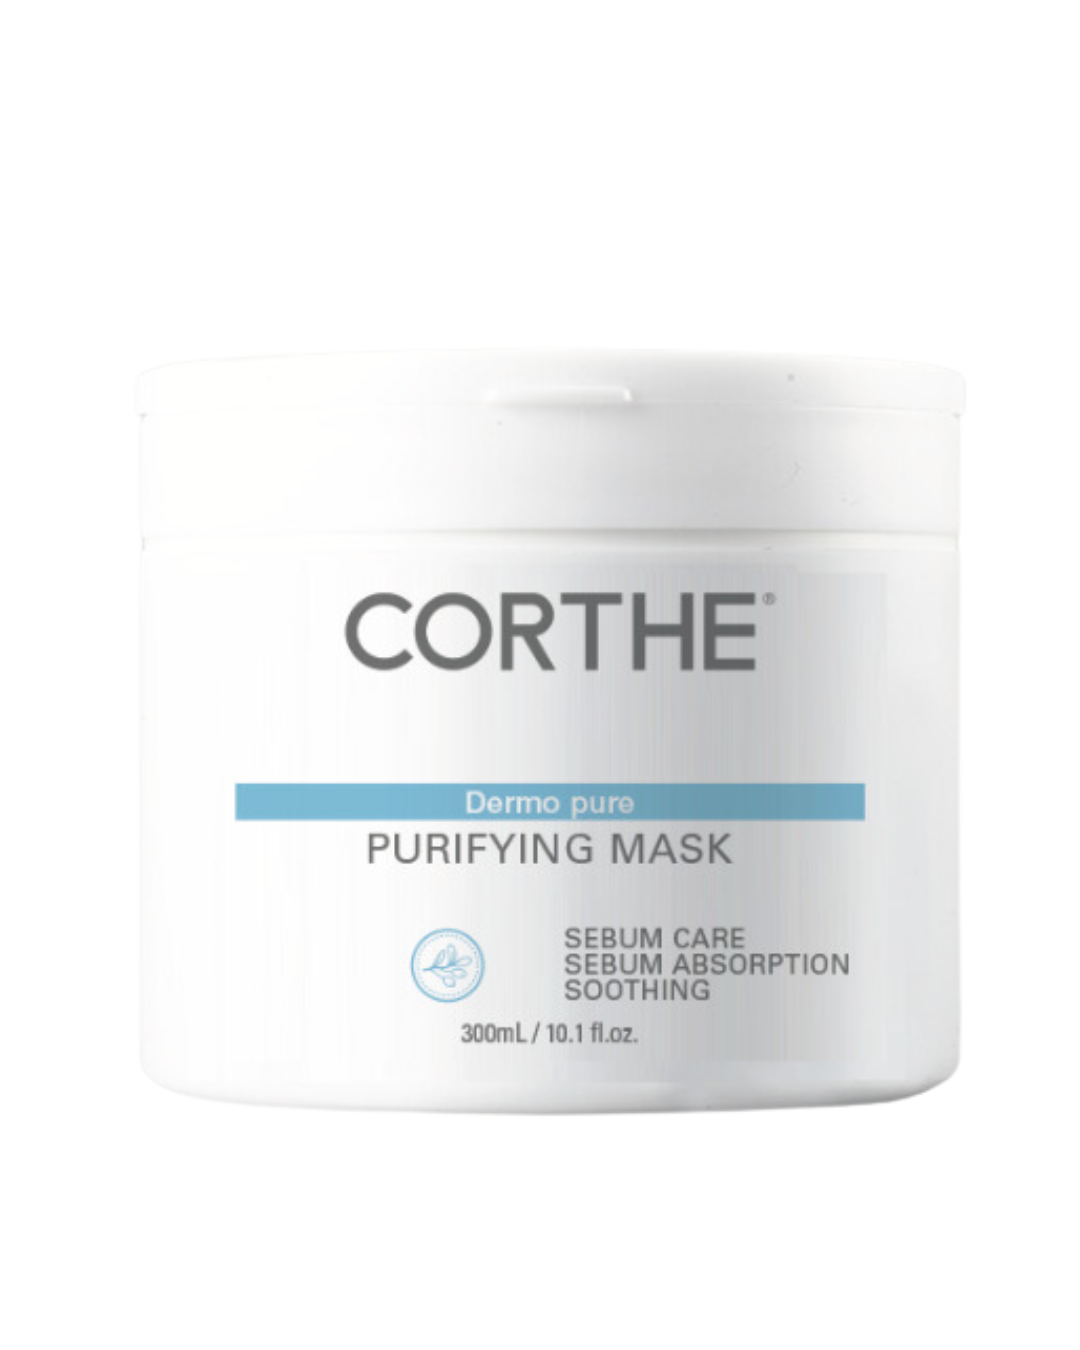 Corthe Dermo Pure Purifying Mask